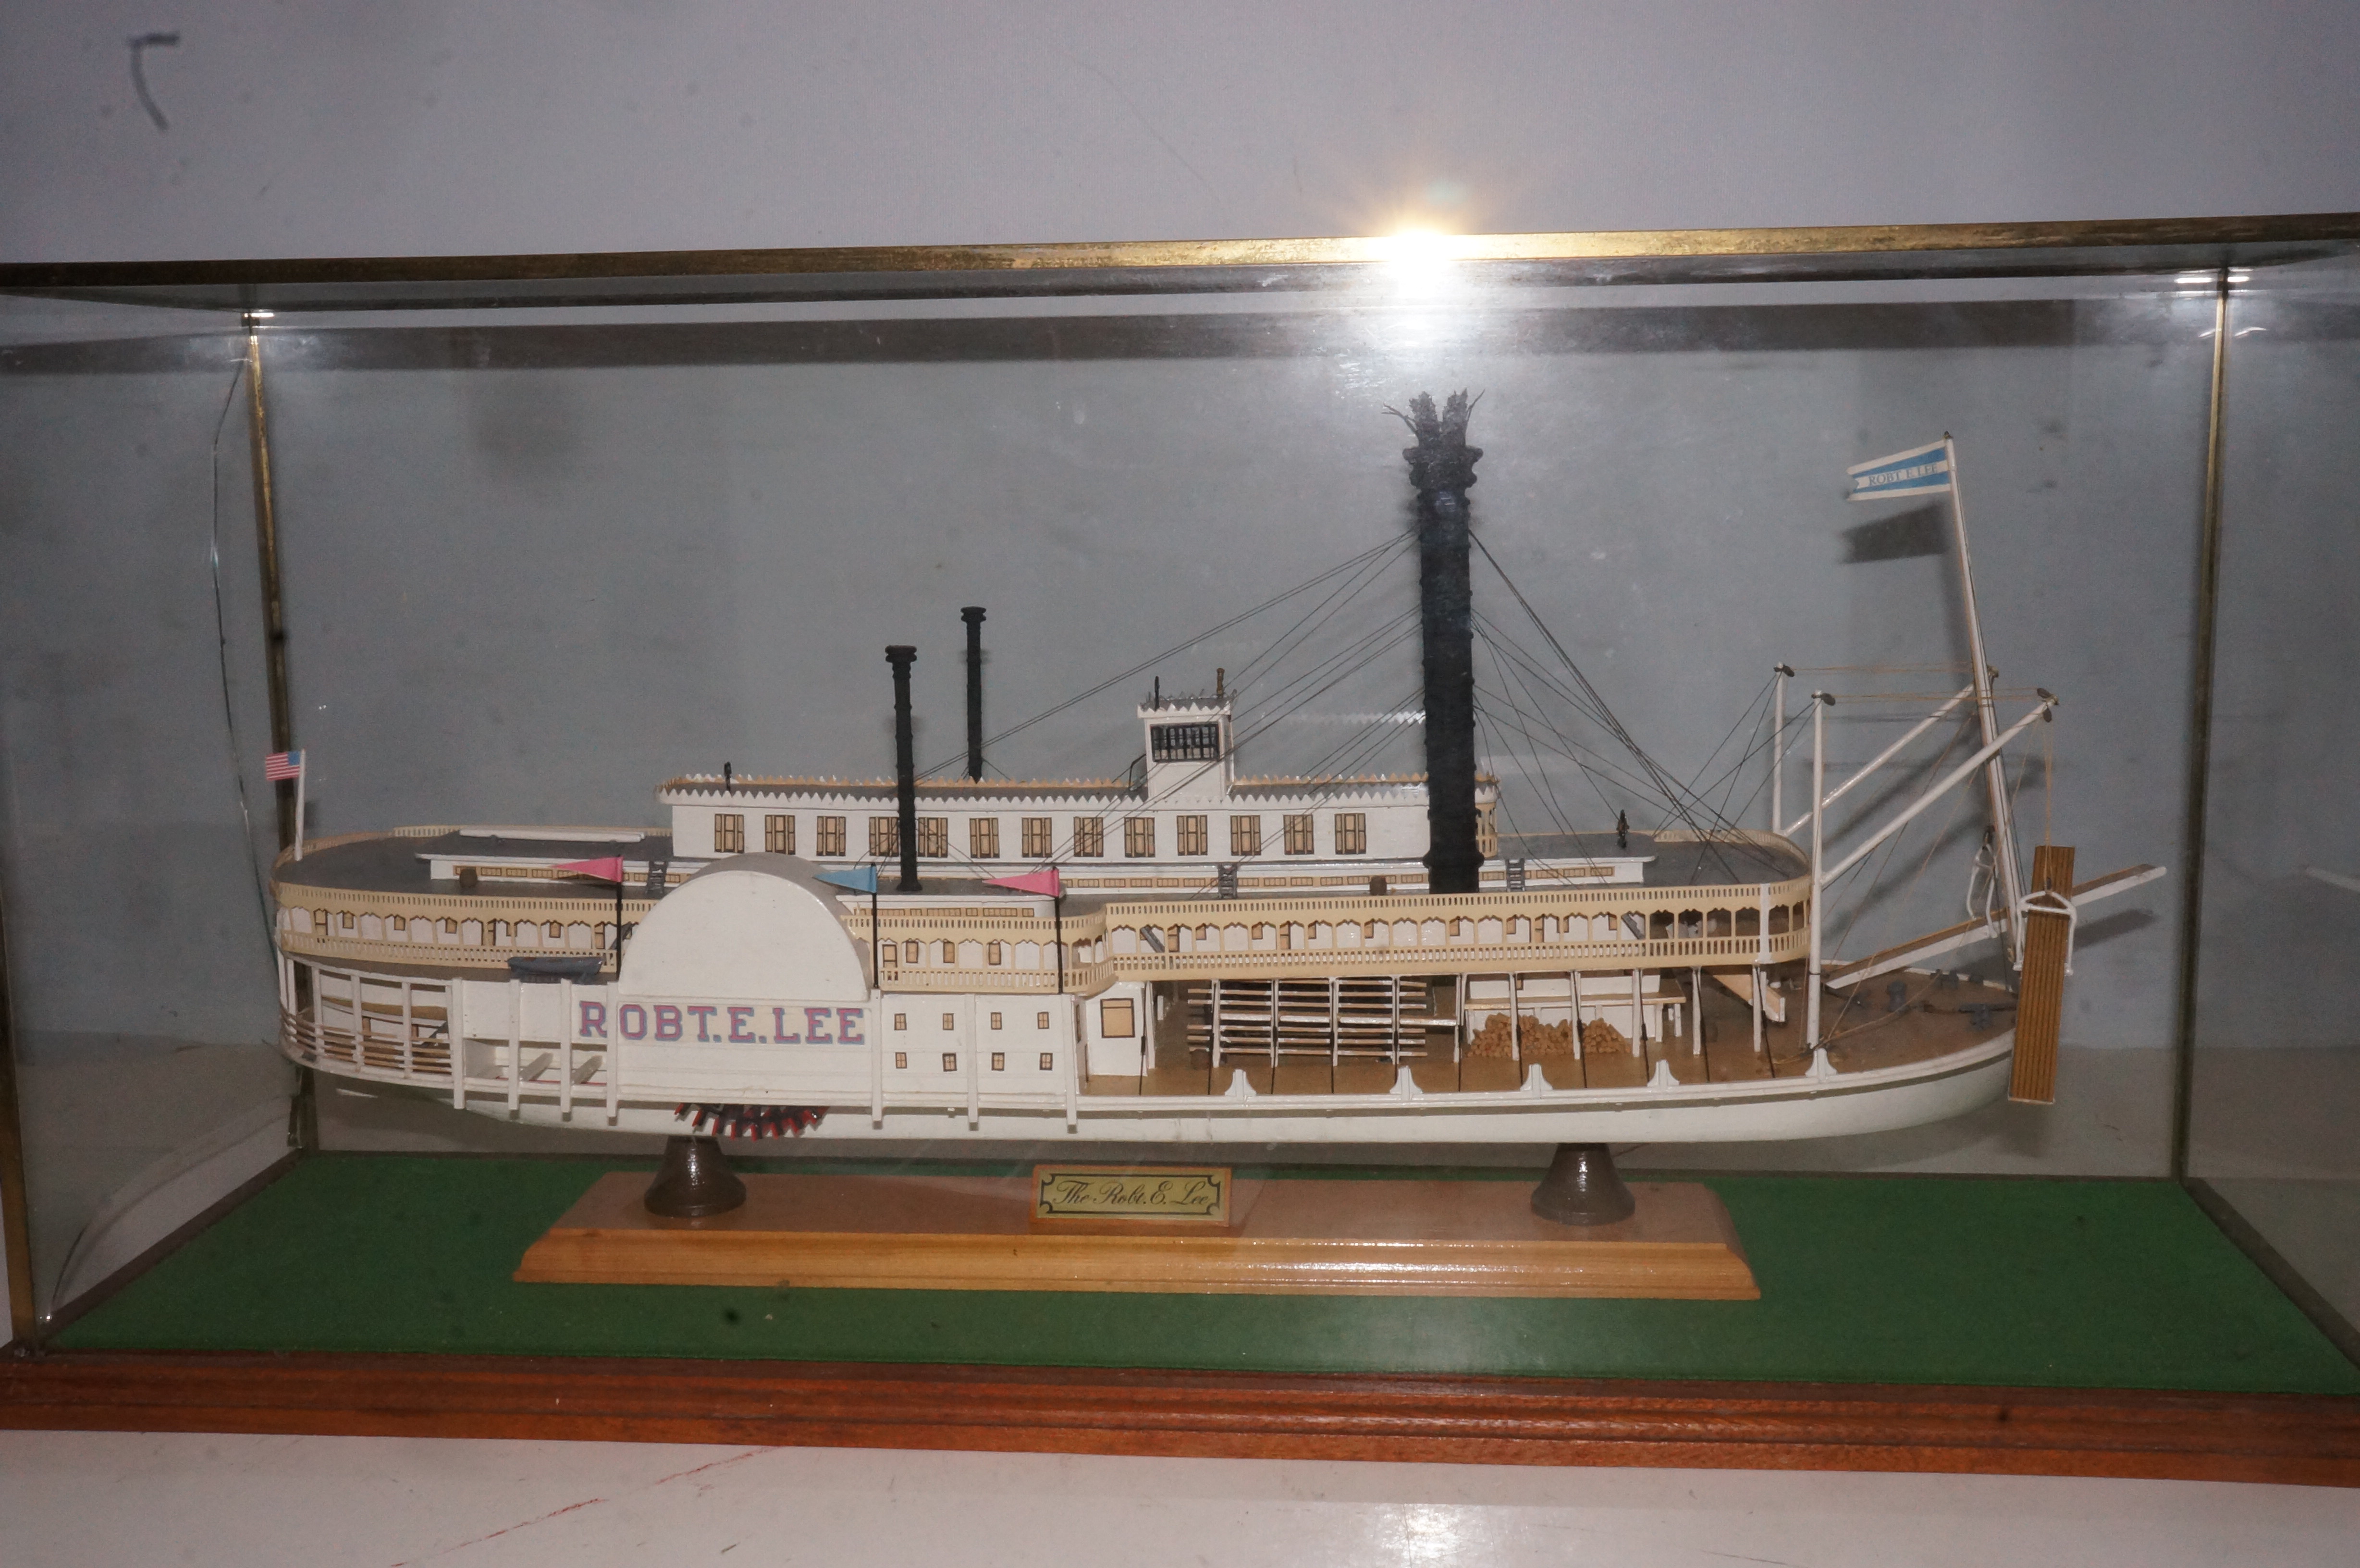 Cased scratch built model of a steamer boat - Glass A/F Length of case 70 cm